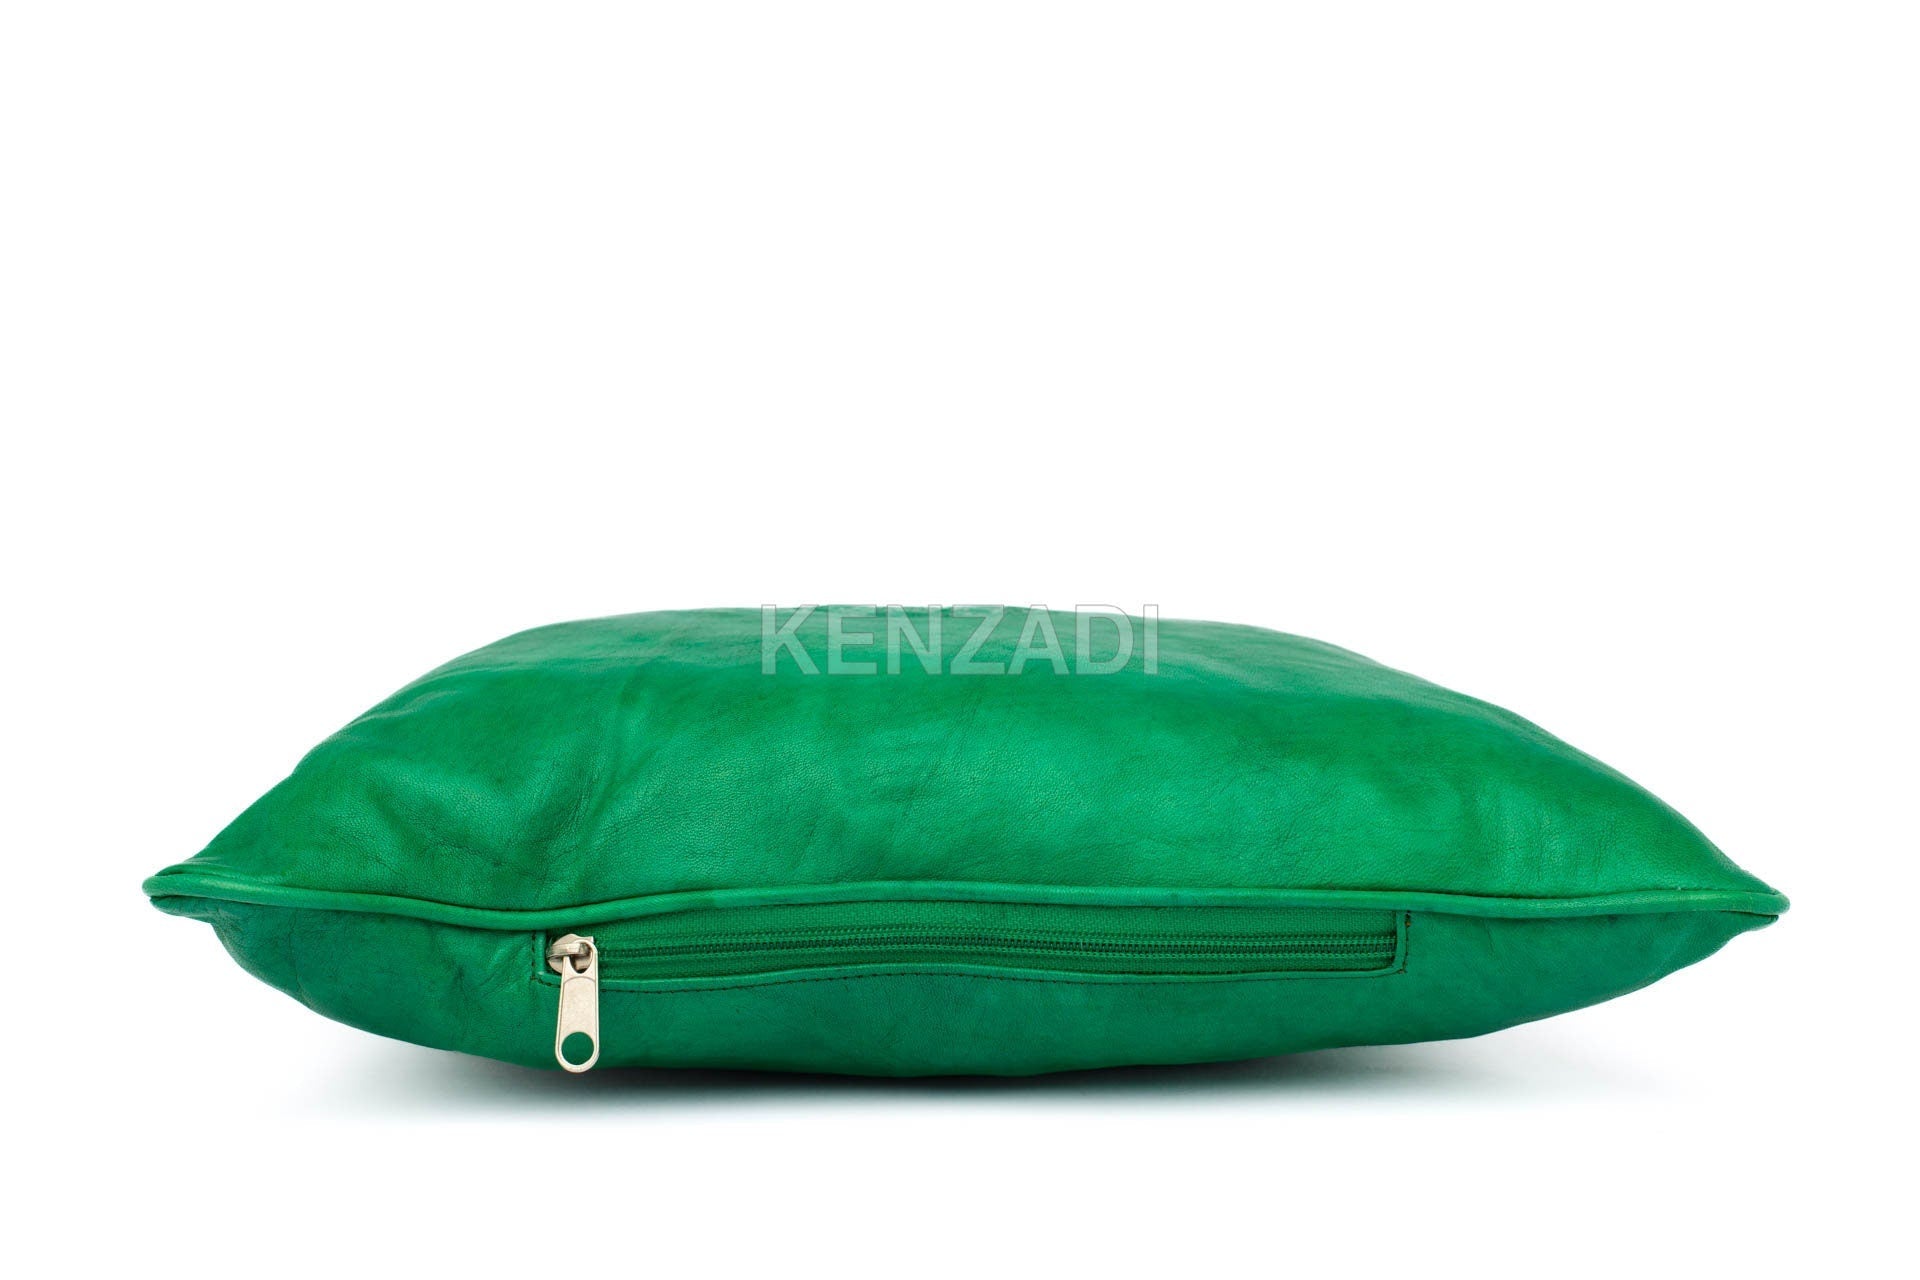 Handmade Moroccan green leather pillowcase - elegant, modern, and classic decor piece for home, car, or commercial use. Available in many colors and easy to clean.